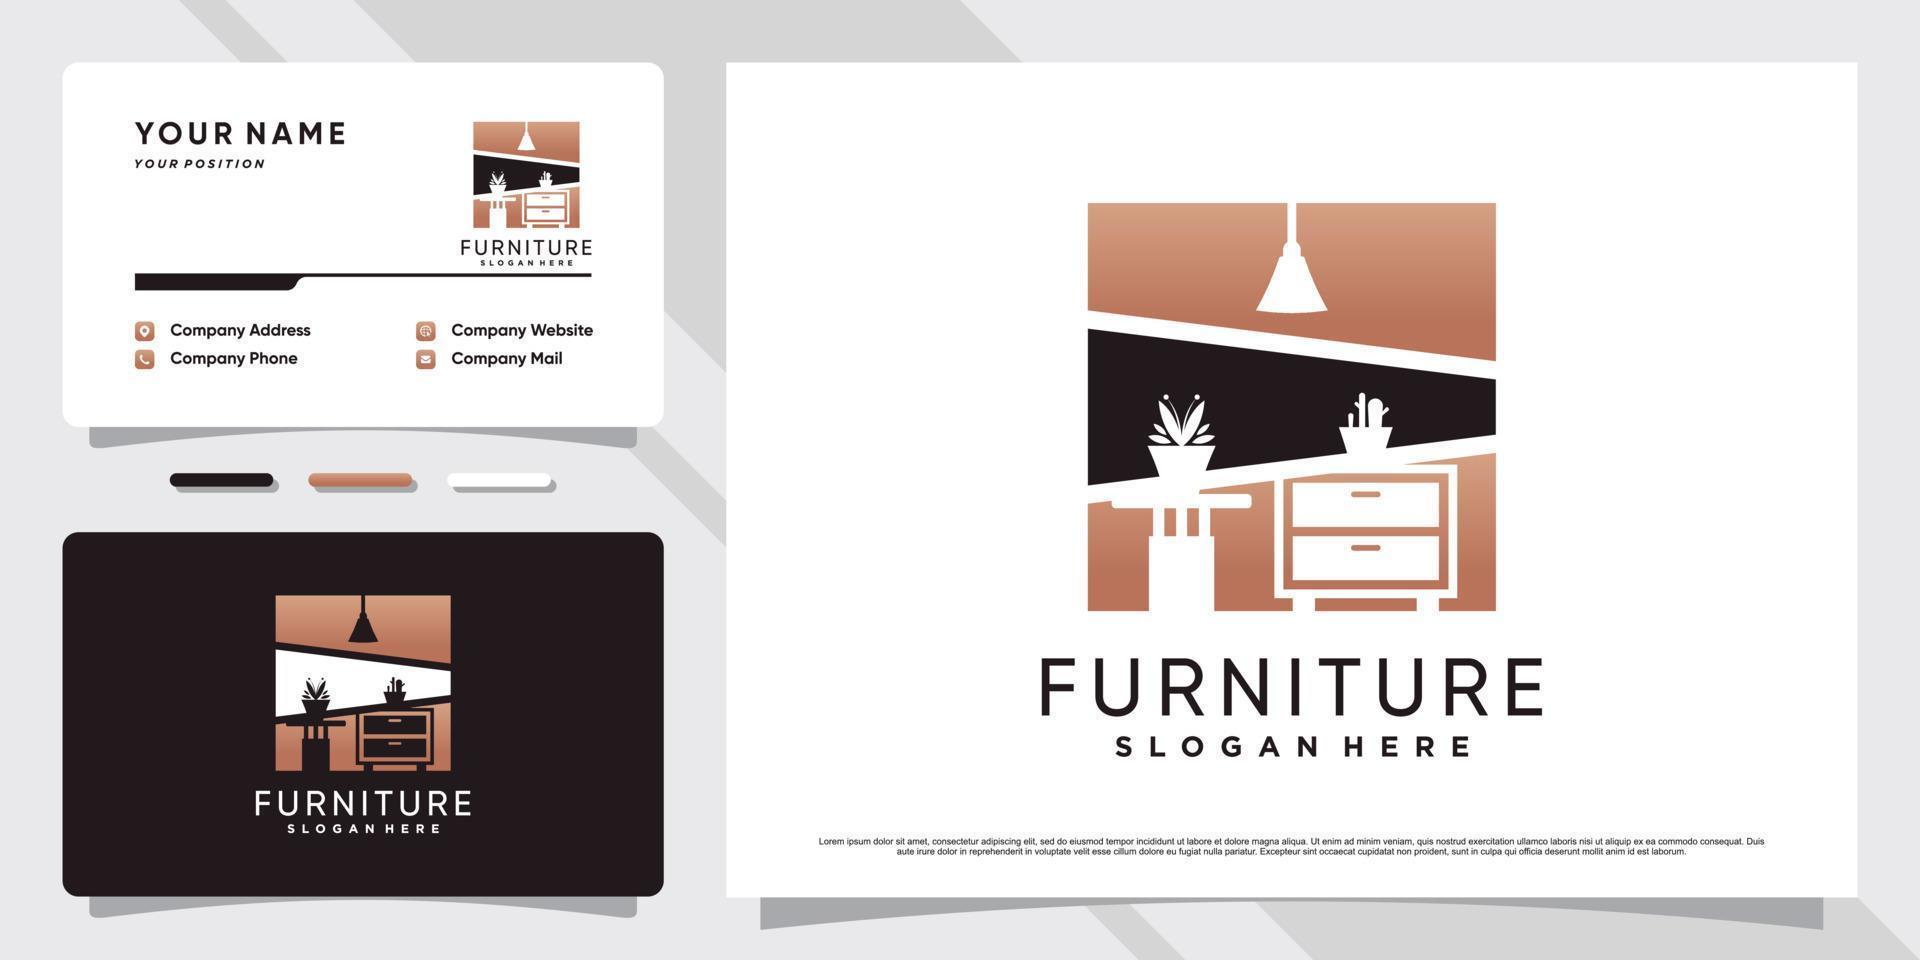 Minimalist furniture logo design inspiration for business property with business card template. vector